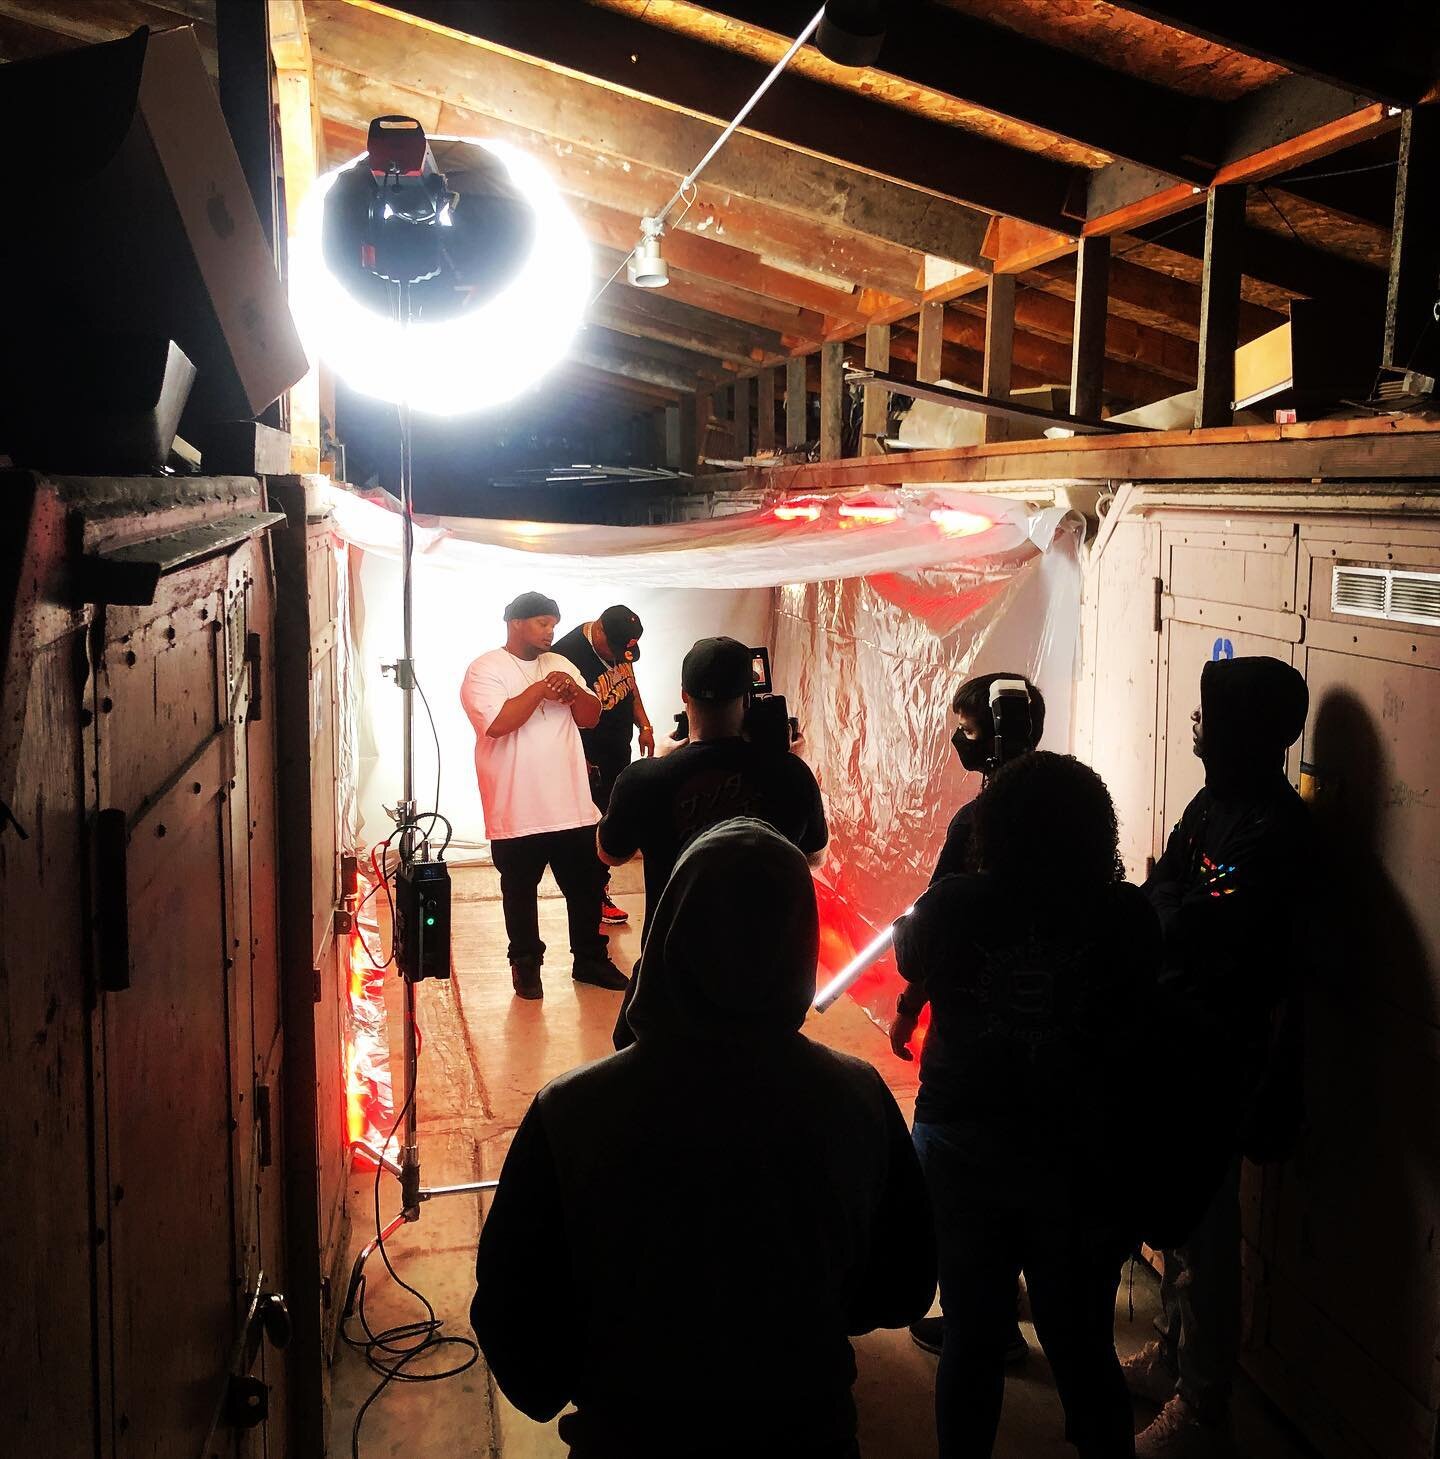 Another dope #musicvideo scene getting shot in our storage hallway #soudwavestudios  #westoakland